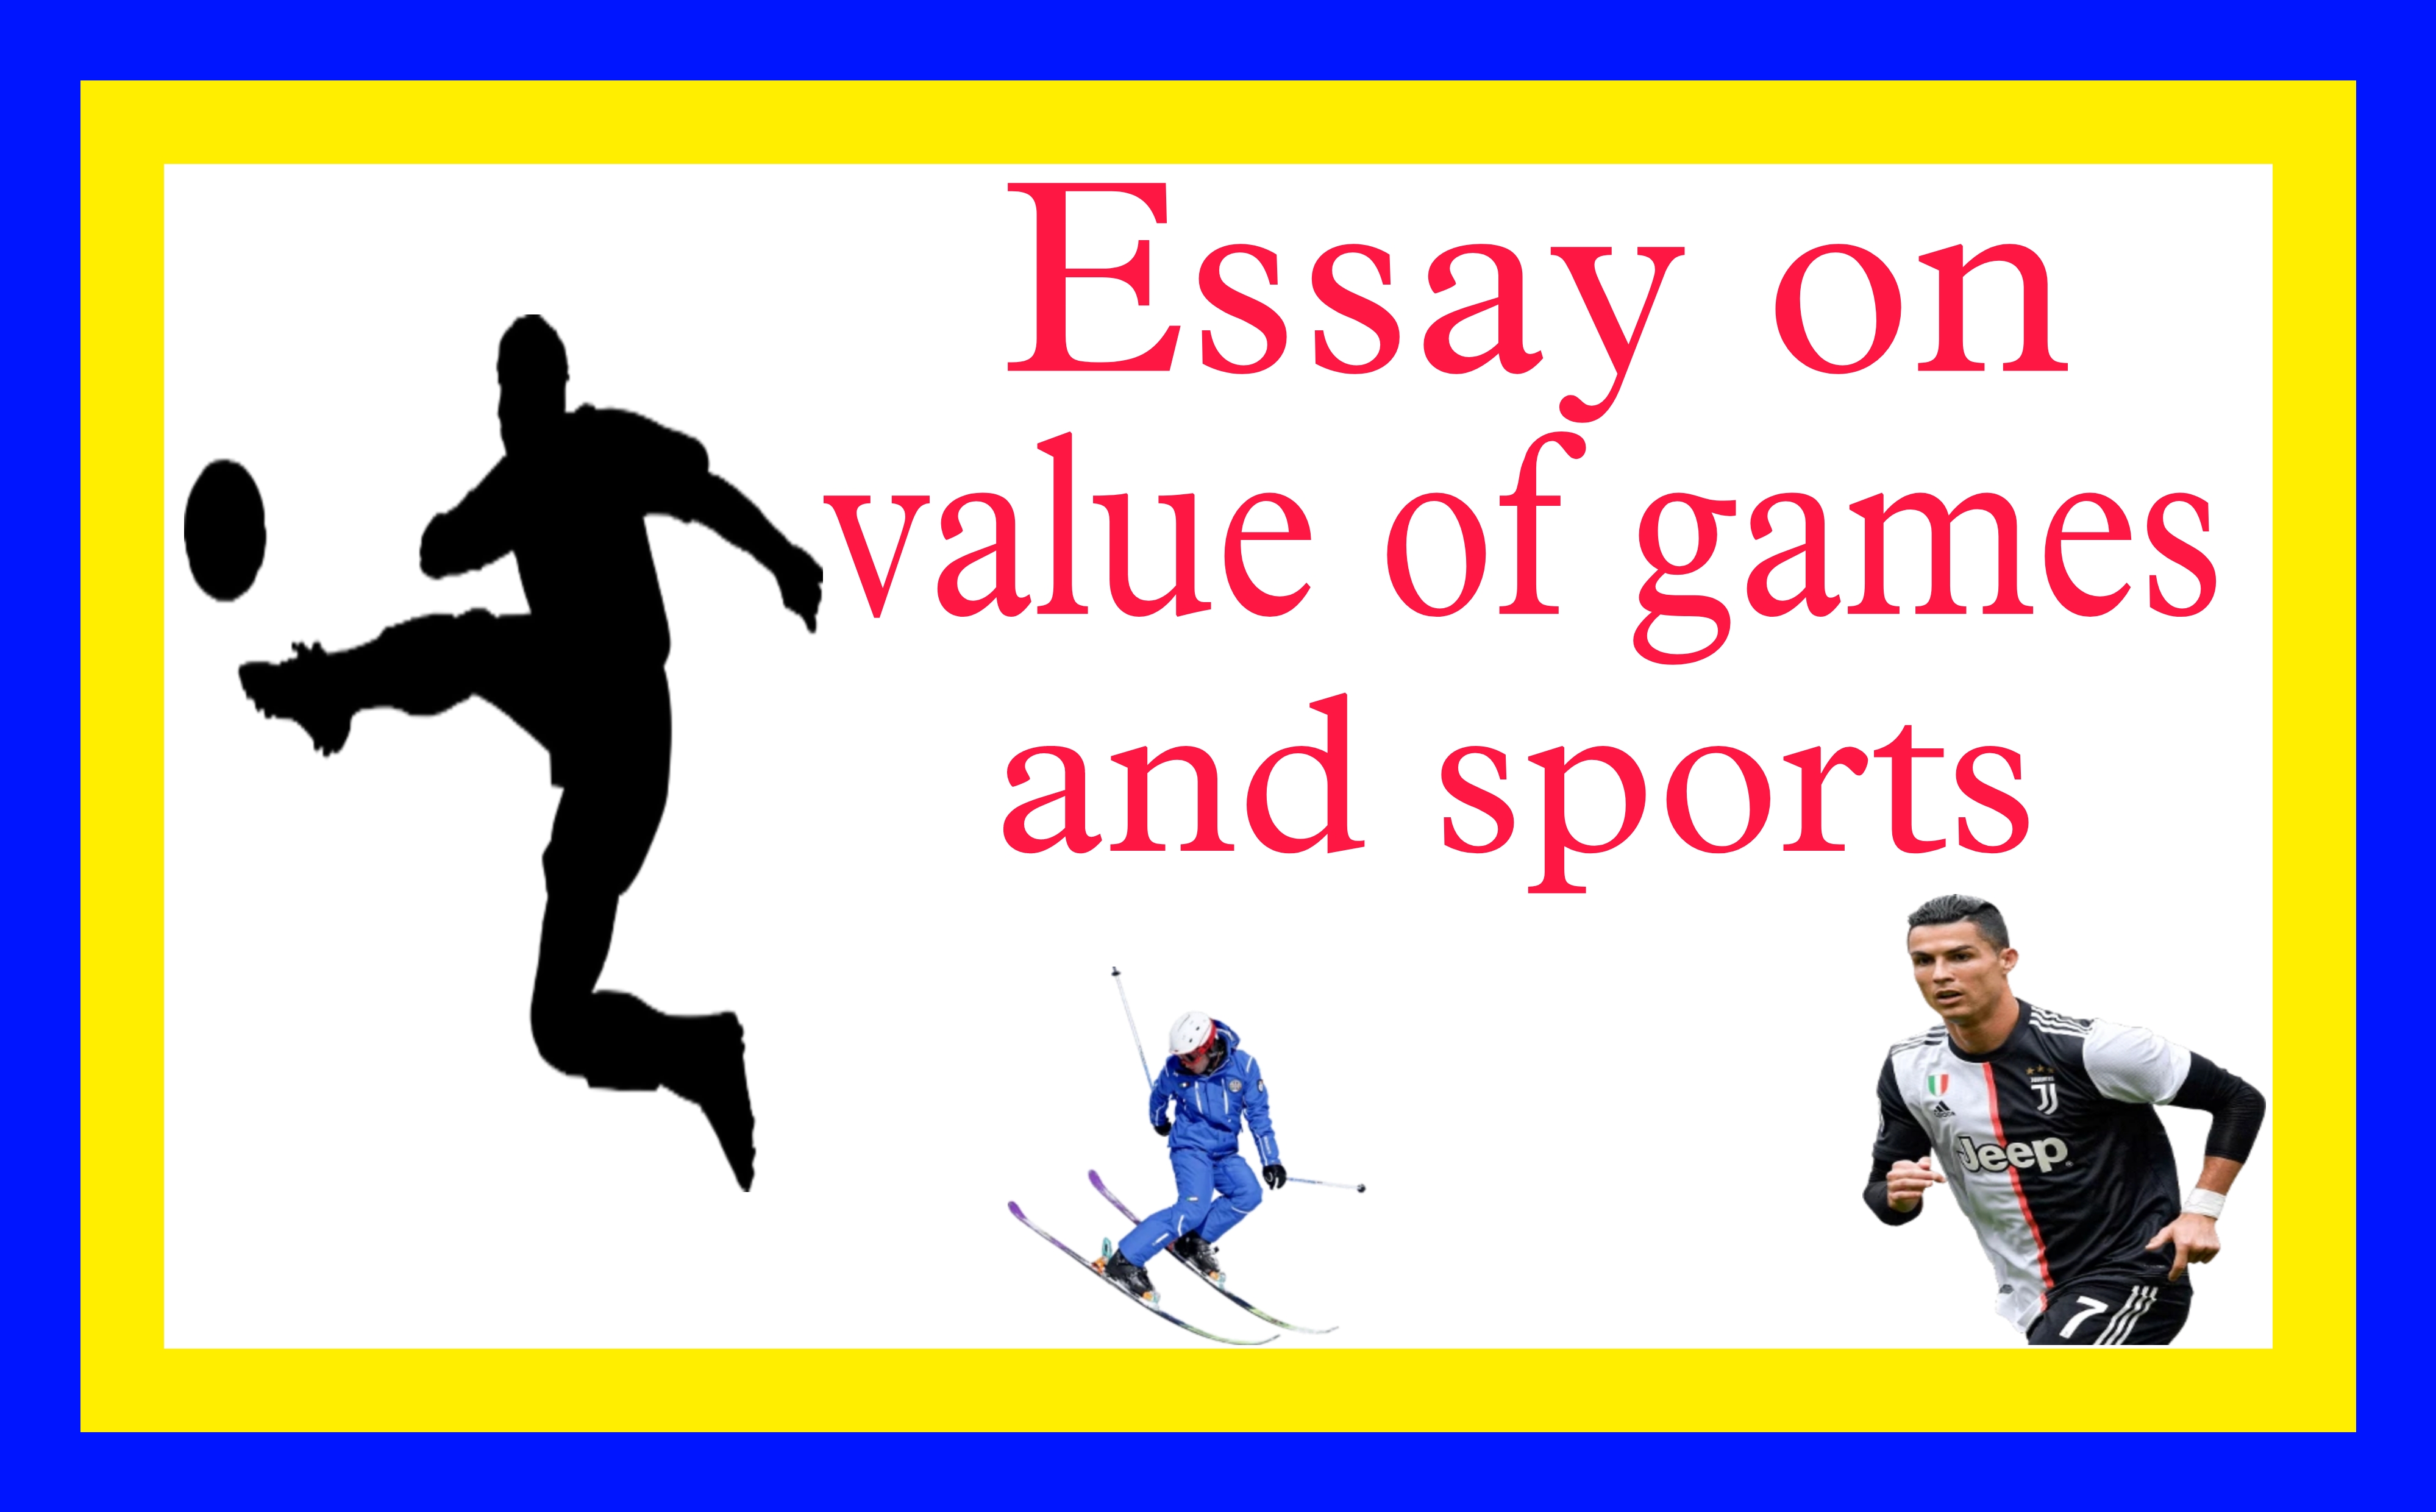 sports and games essay in english